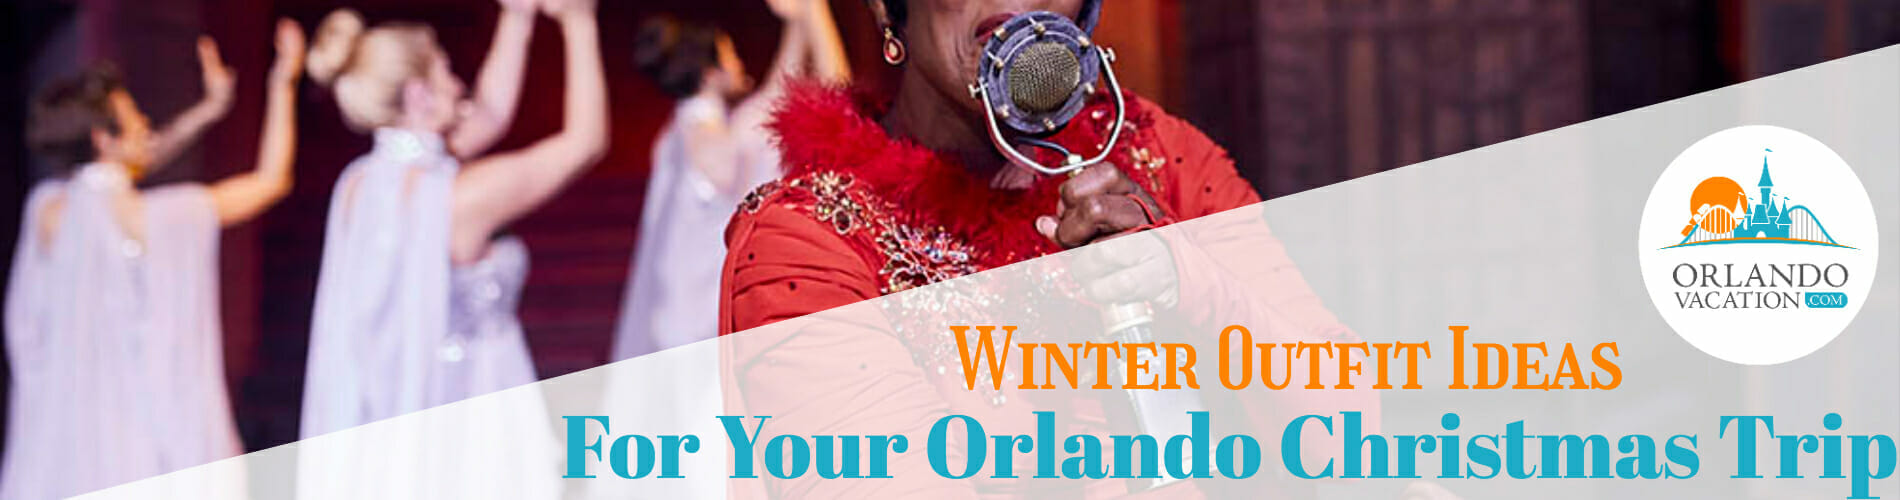 Winter Outfit Ideas For Orlando Christmas